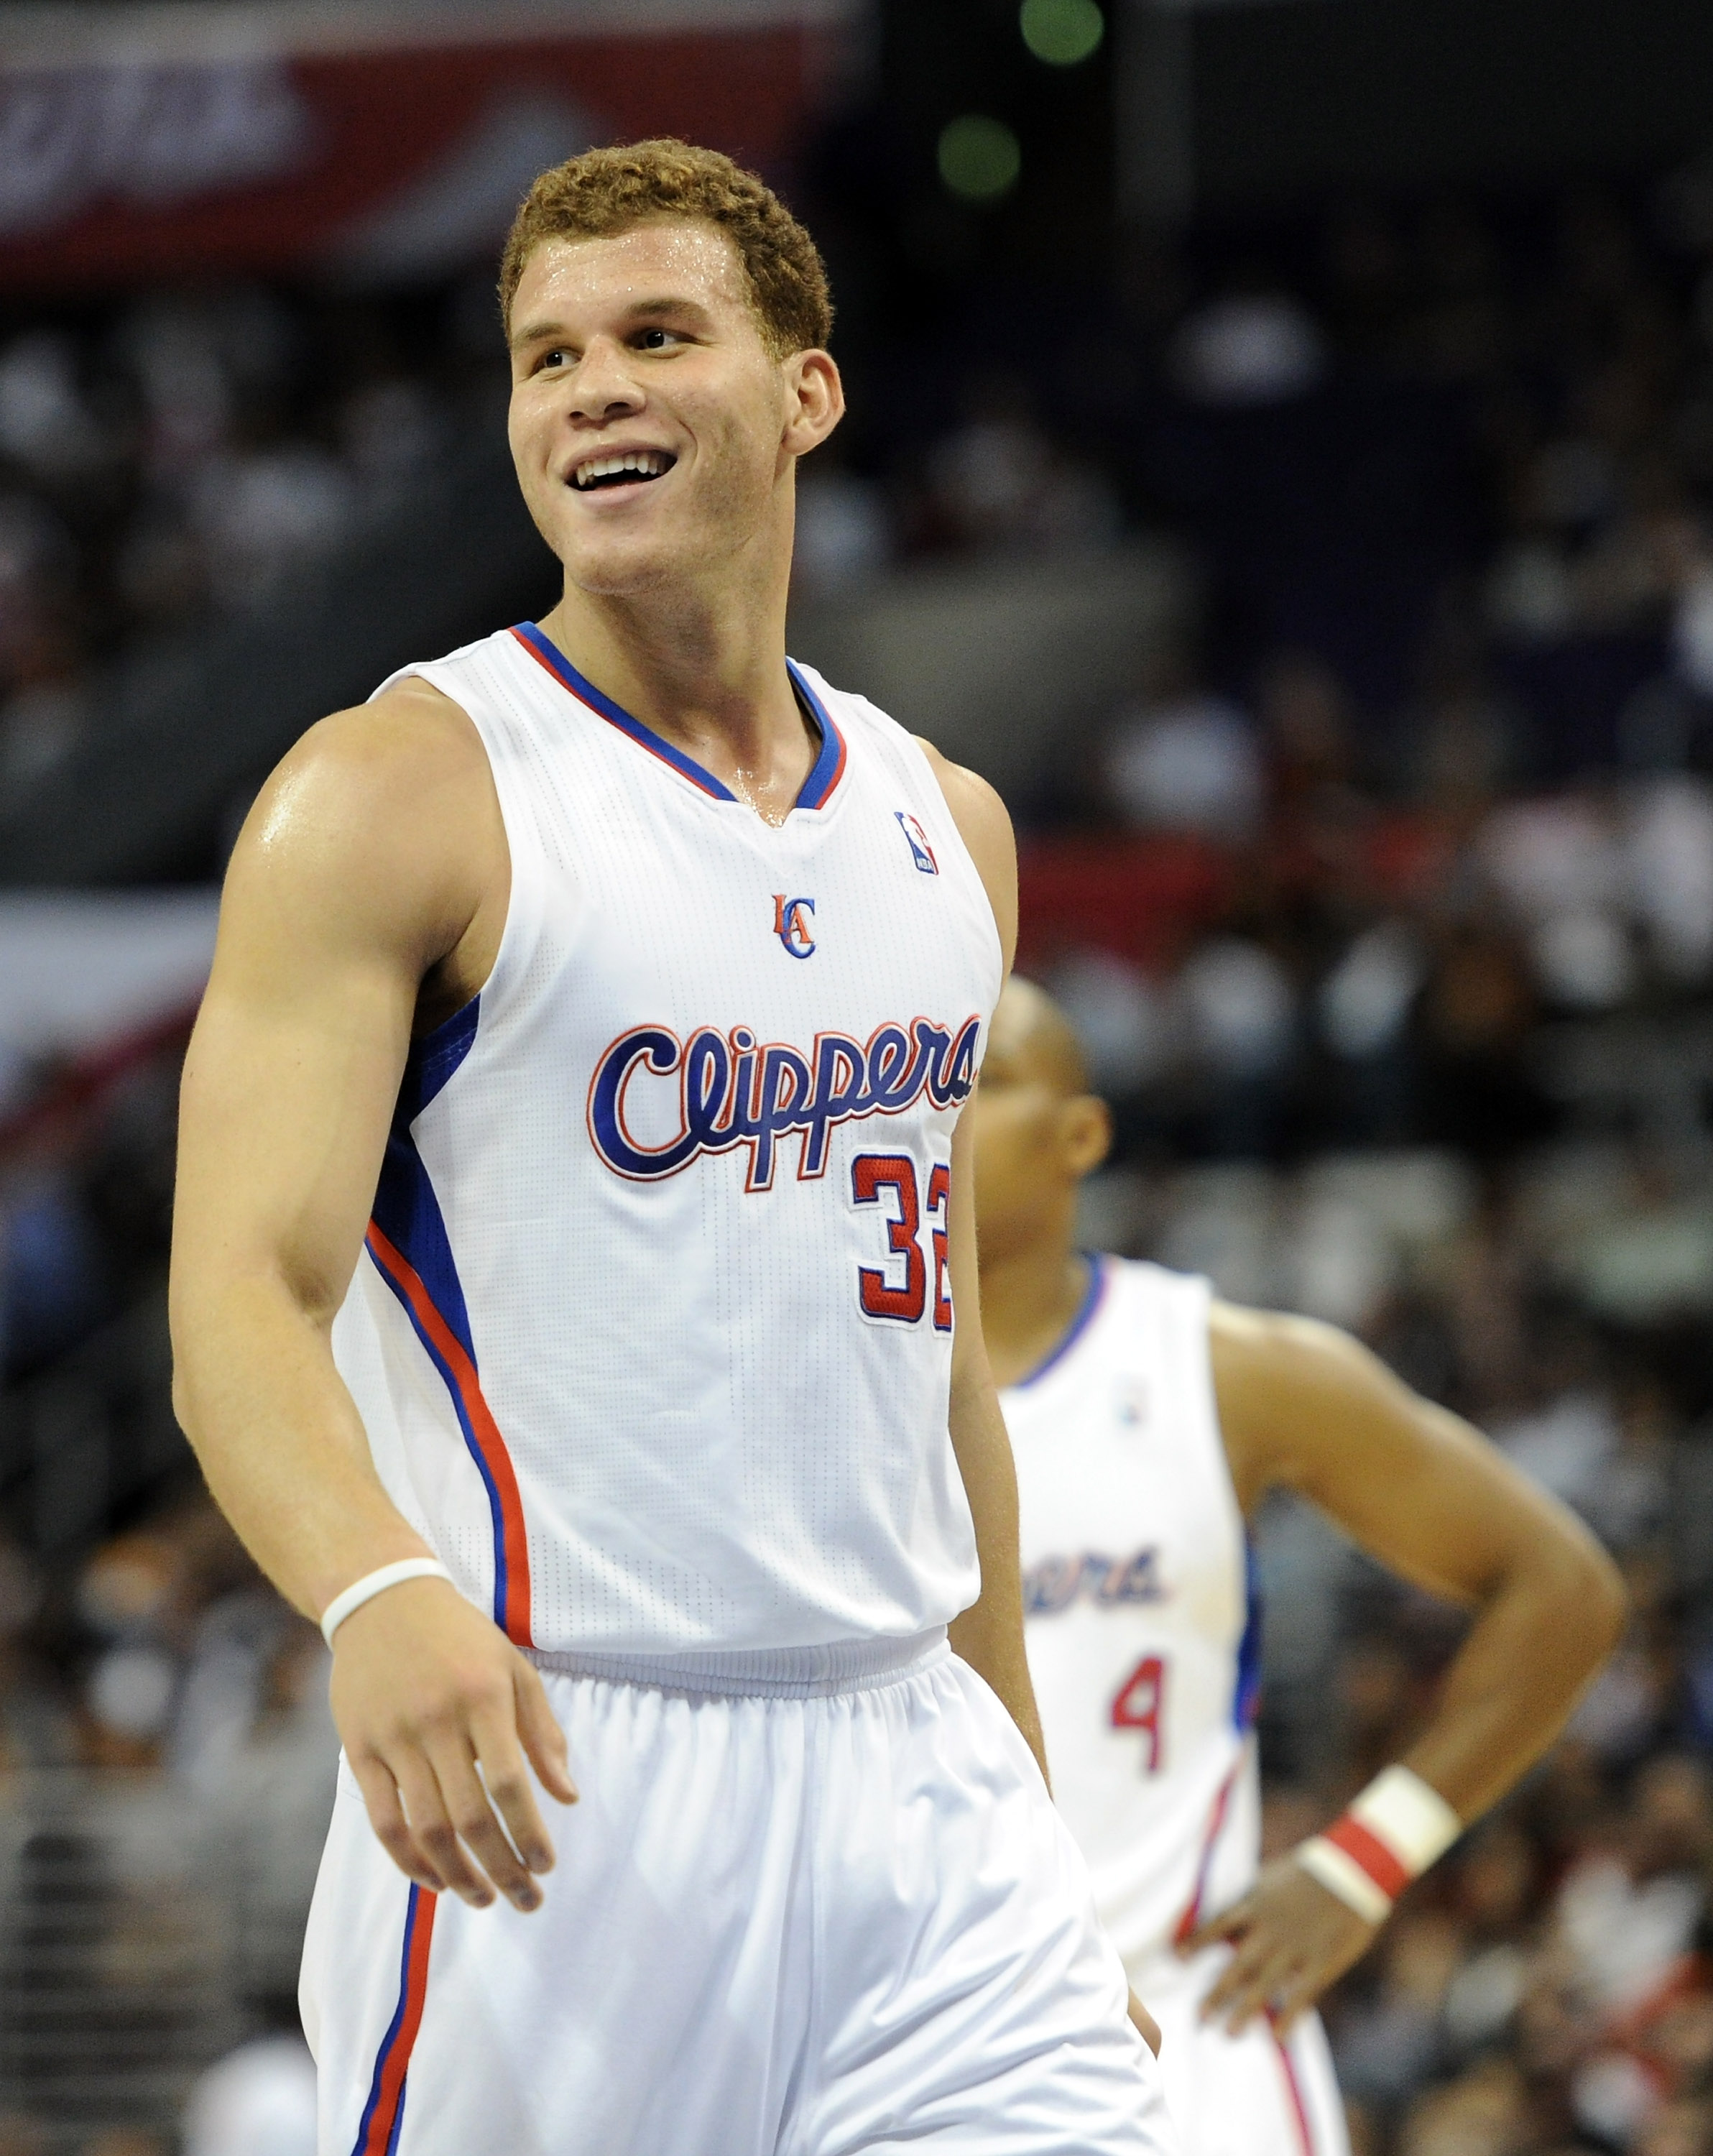 Adidas NBA Youth Los Angeles Clippers Blake Griffin #32 Player